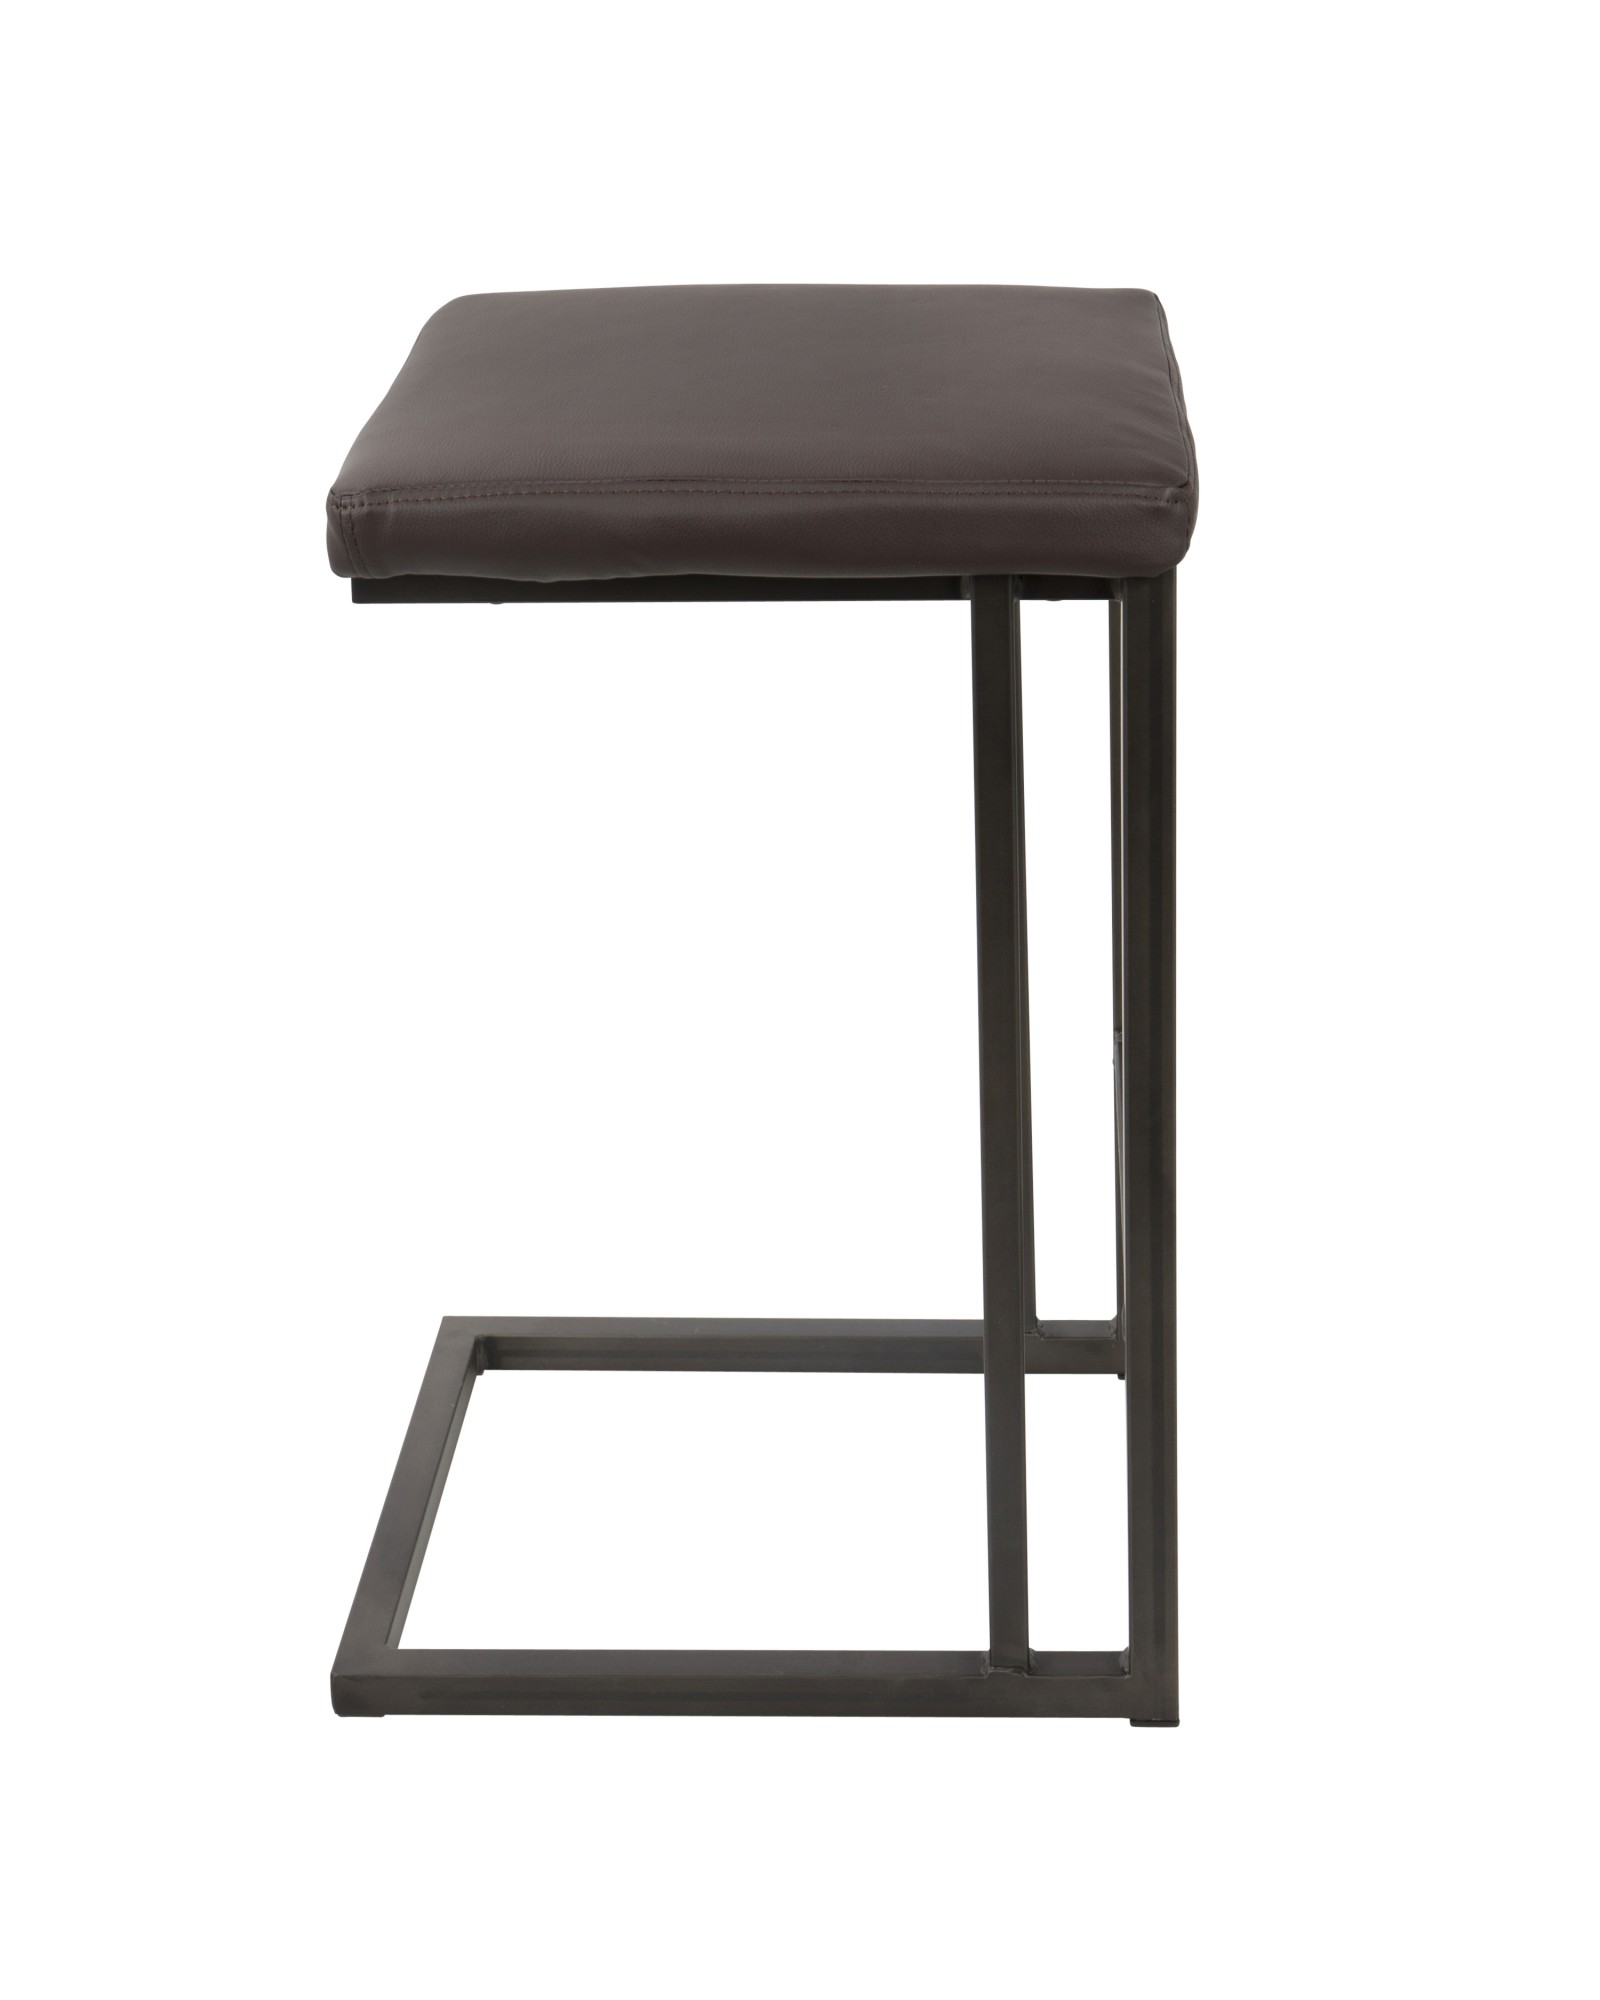 Roman Industrial Counter Stool in Antique and Espresso Faux Leather - Set of 2